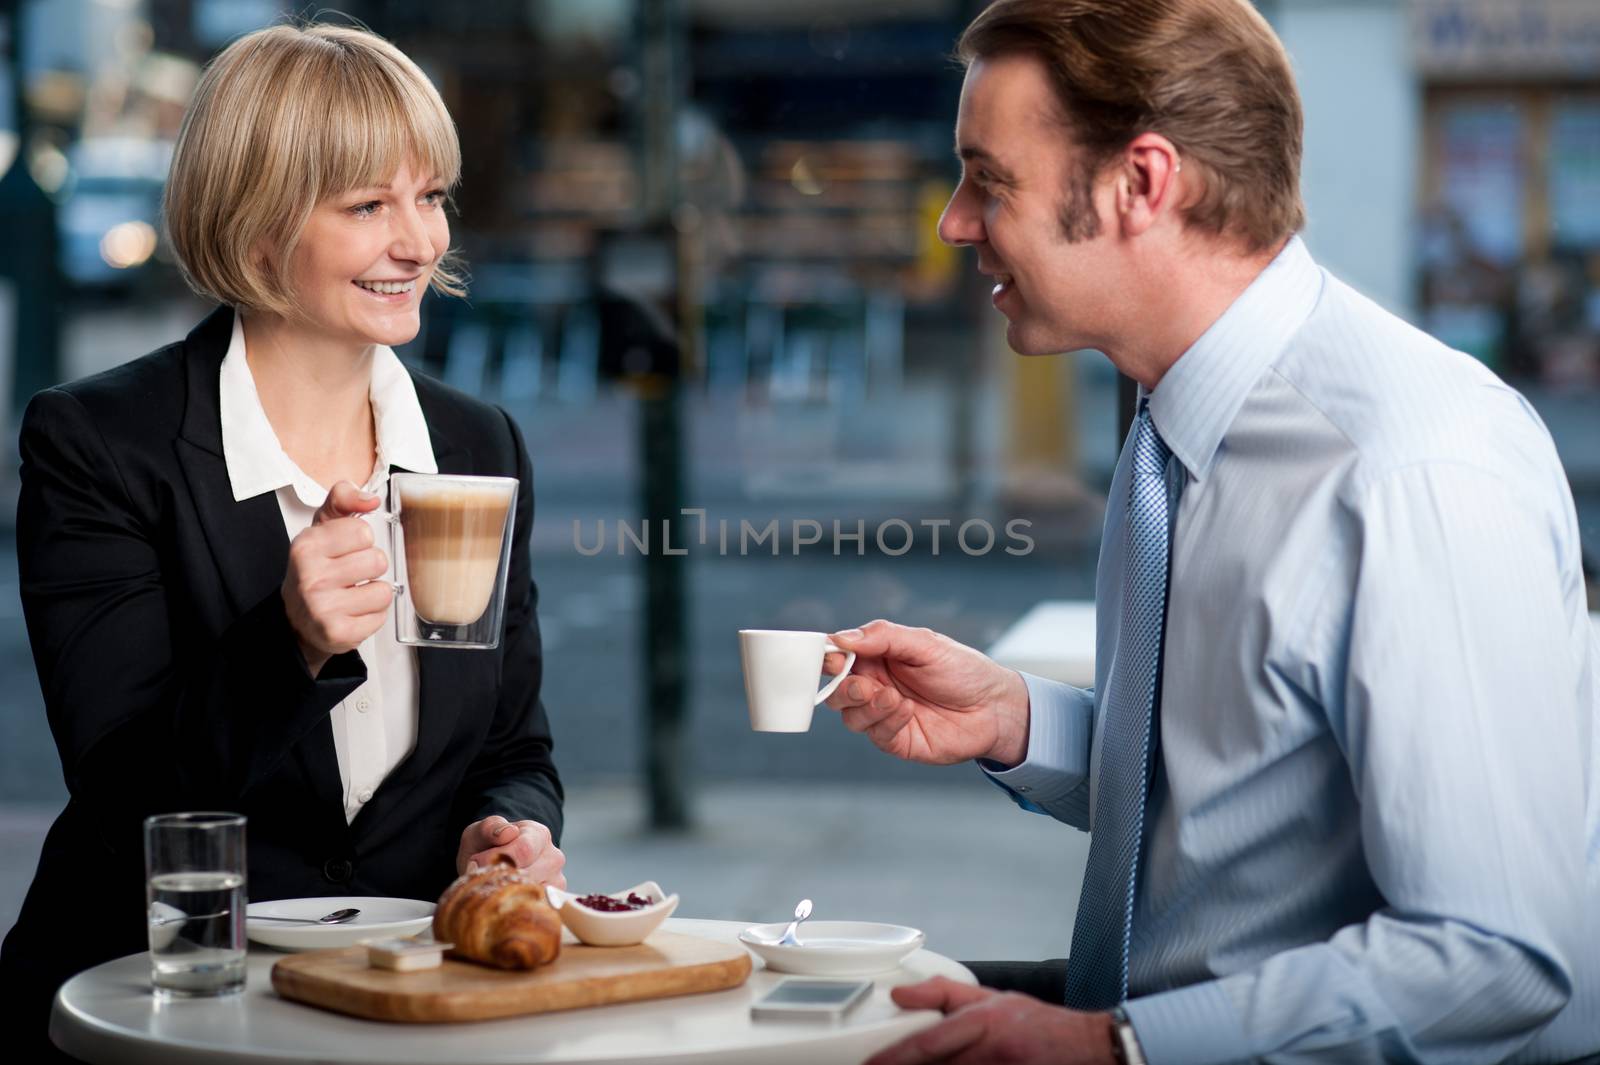 Business partners toasting coffee at cafe